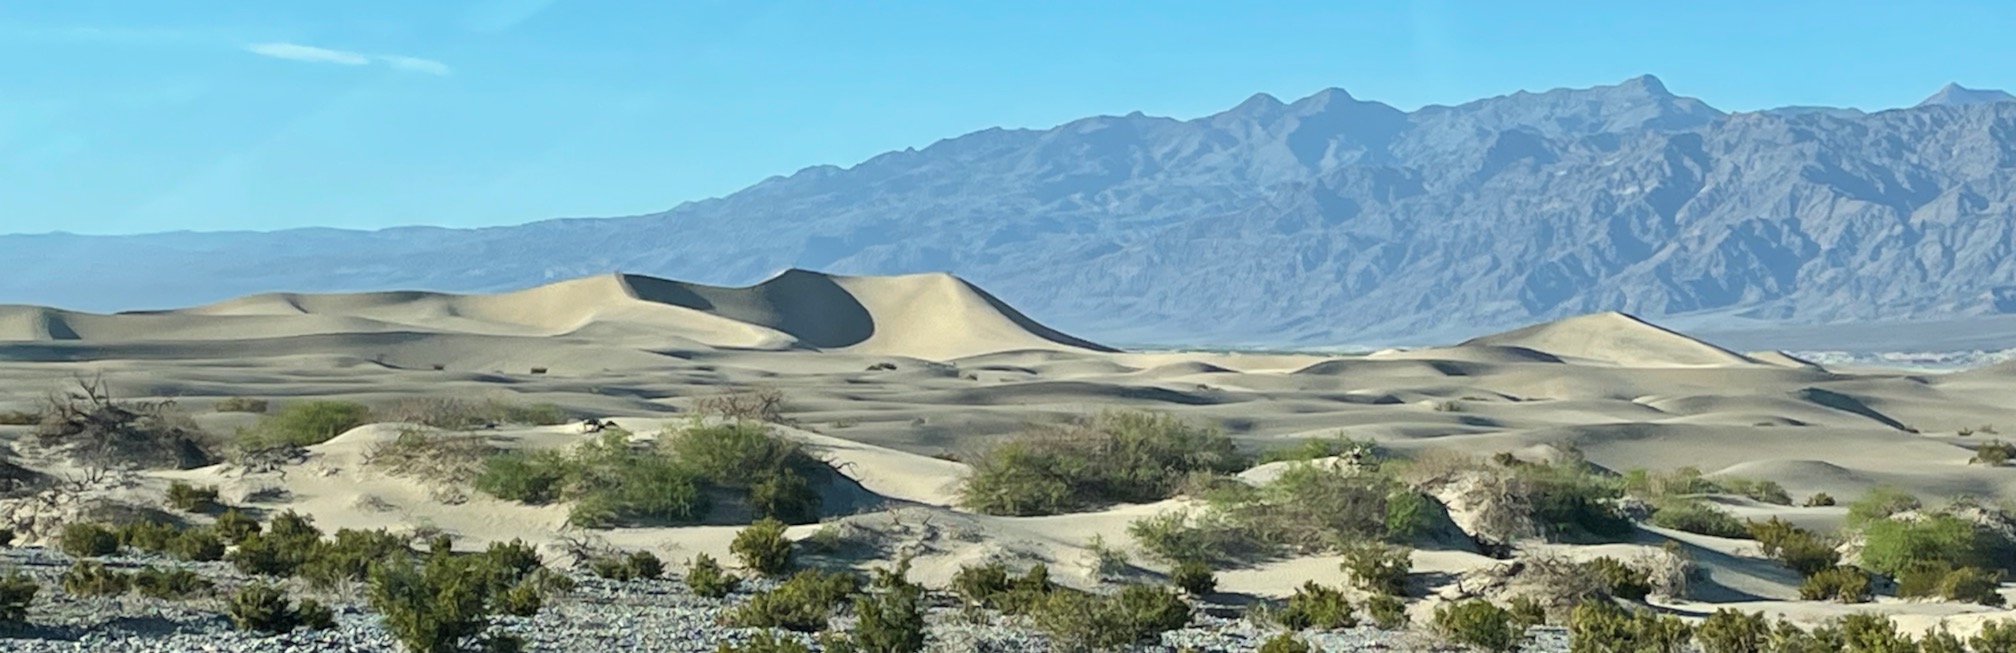 sand dunes in front of larger mountain range